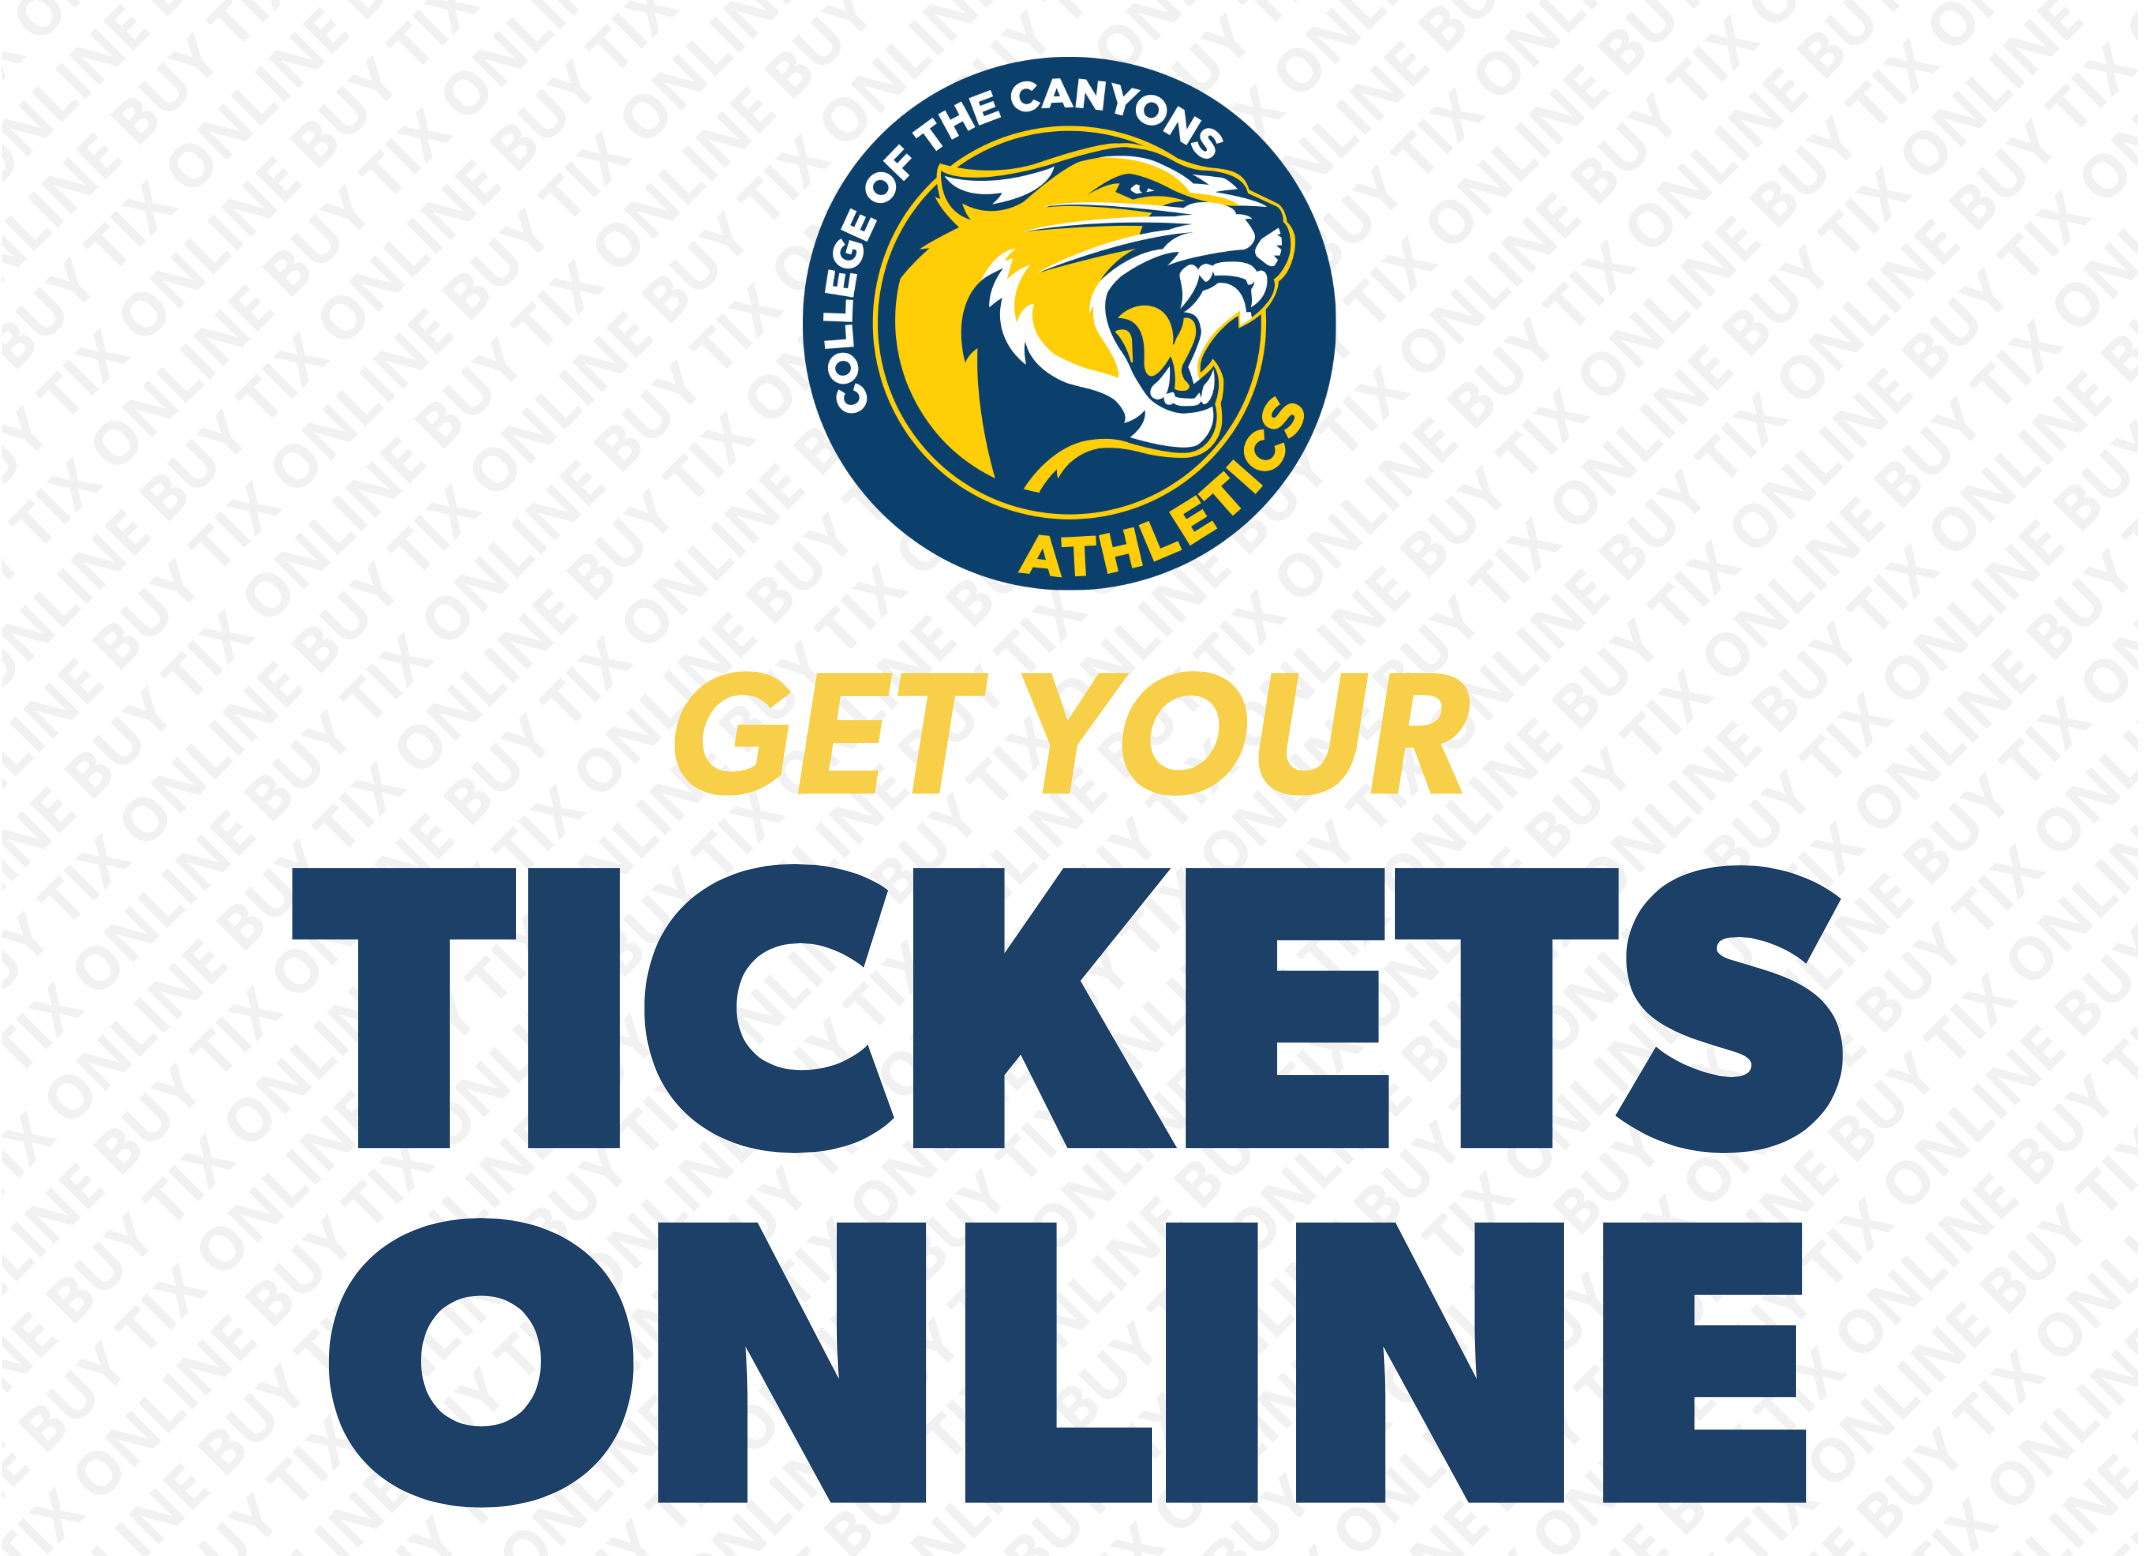 College of the Canyons Athletics online tickets promotional image.